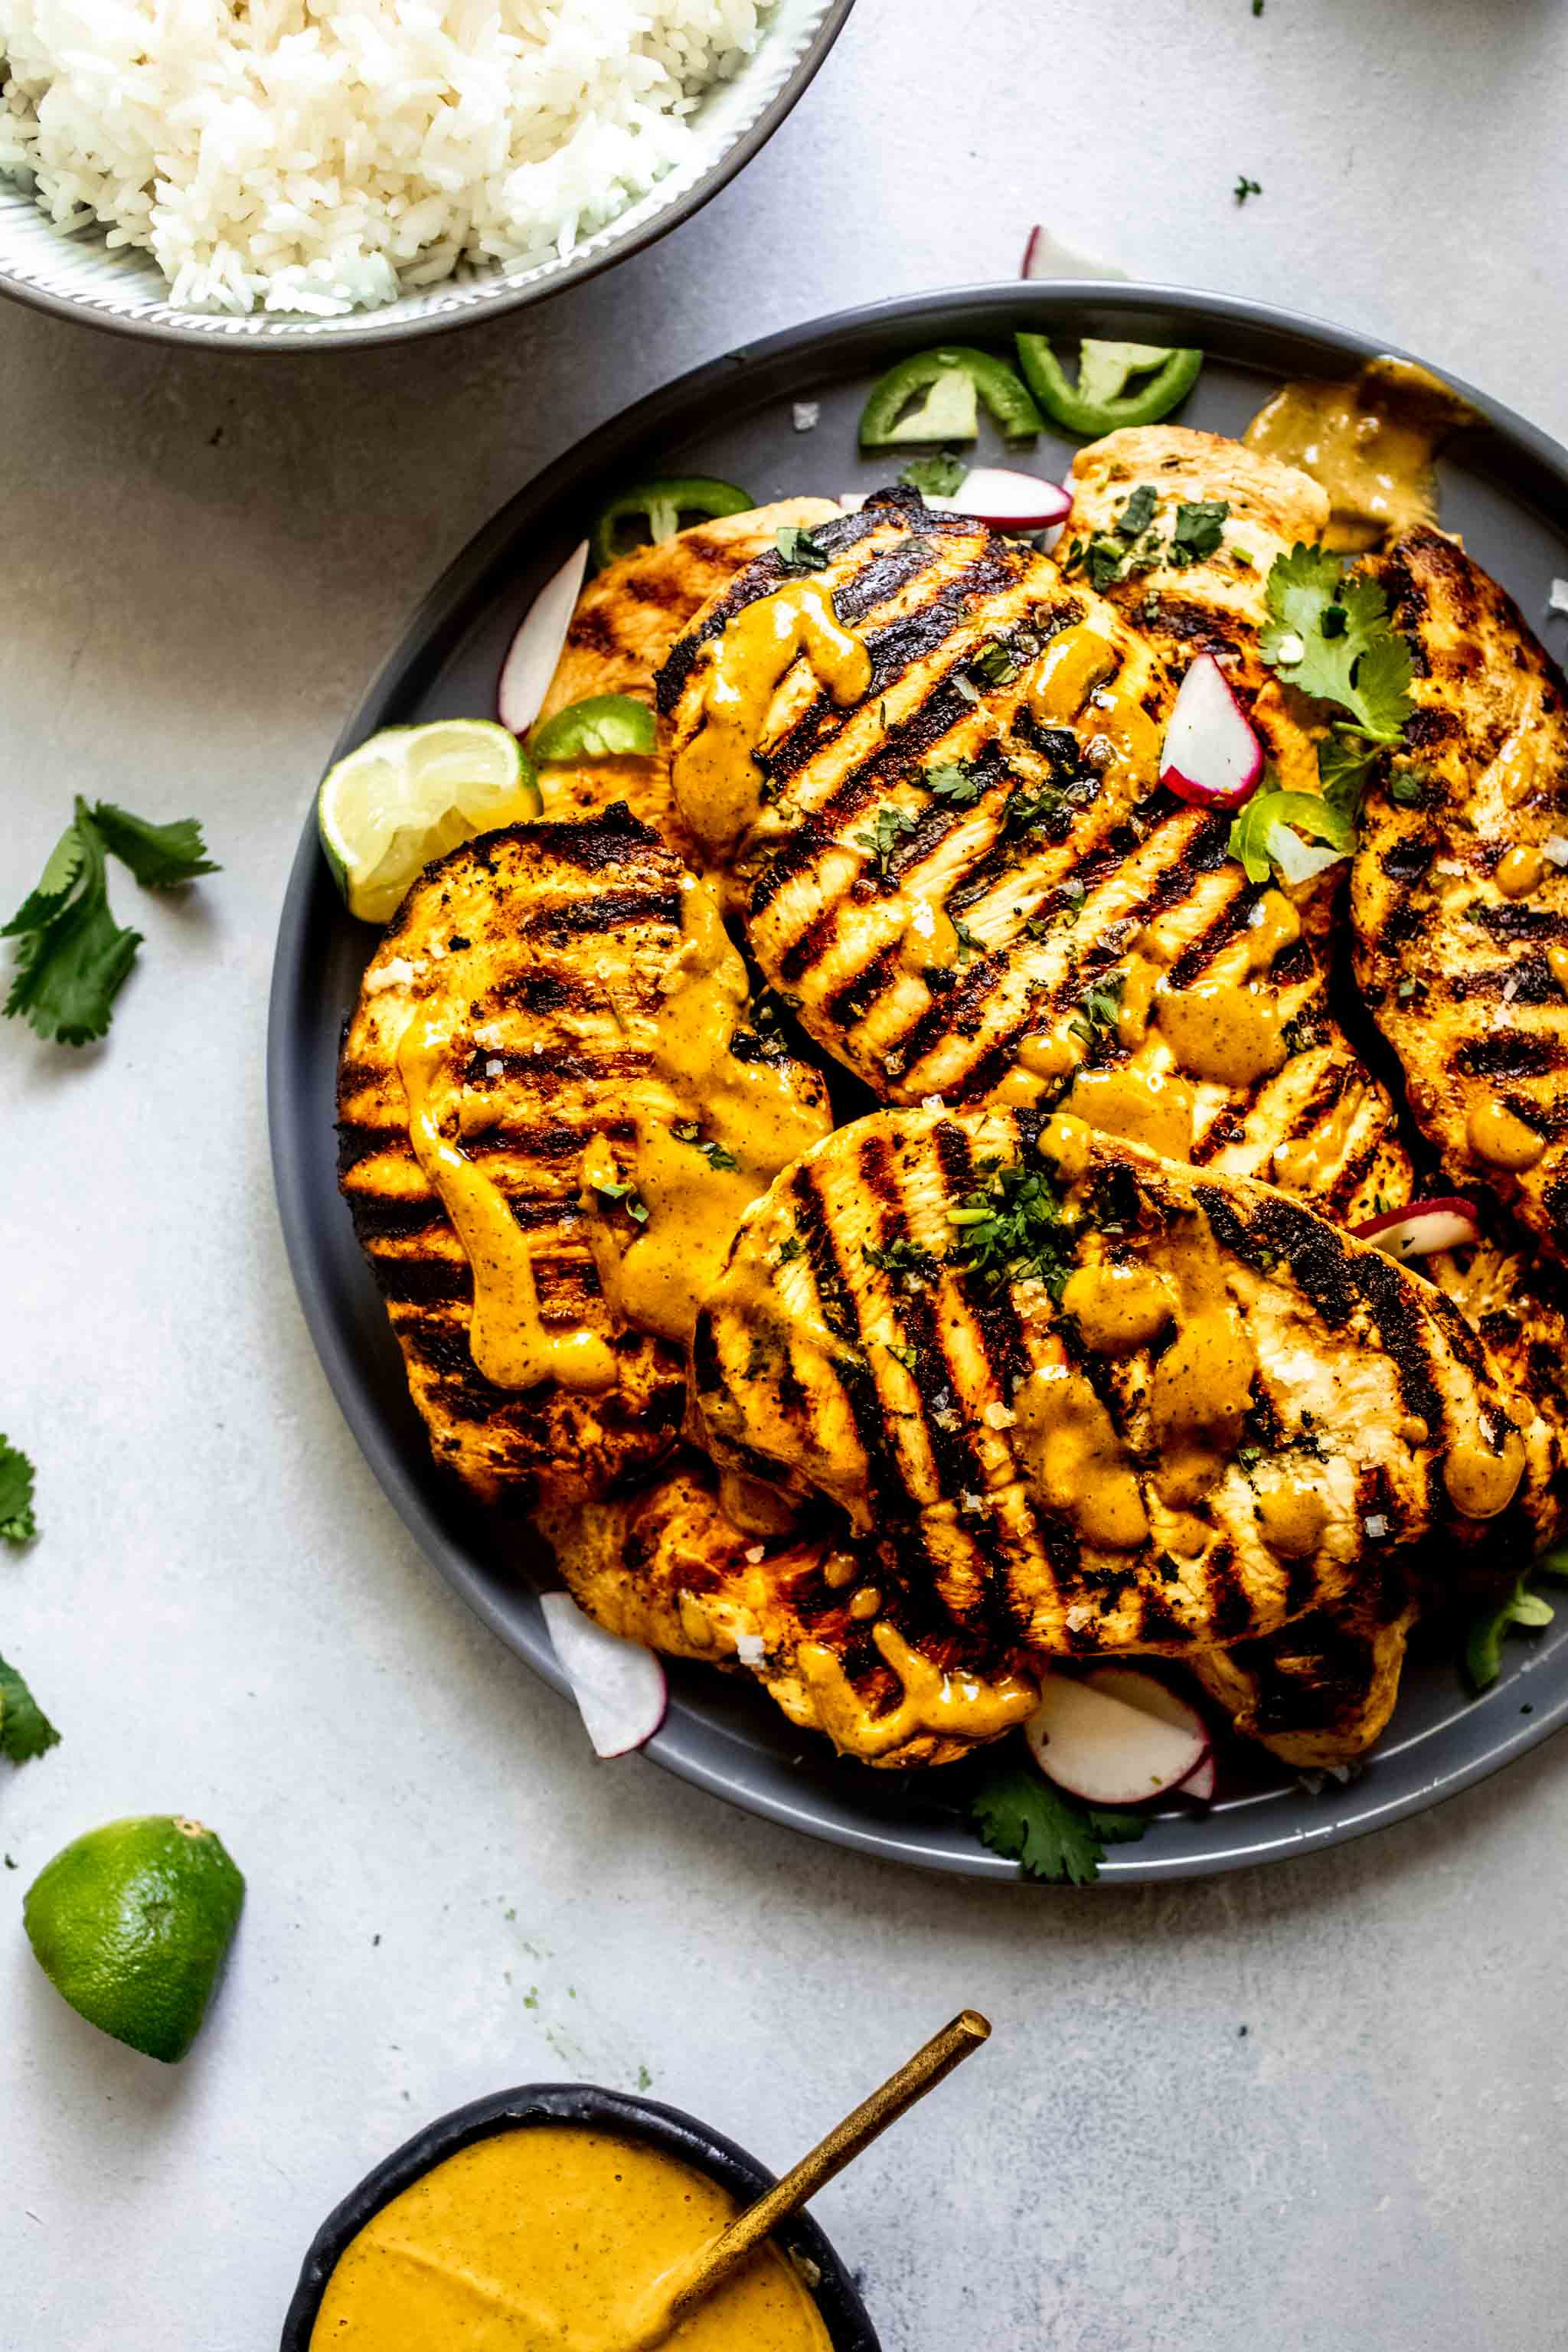 Grilled chicken breasts on grey plate drizzled with spicy peanut sauce.